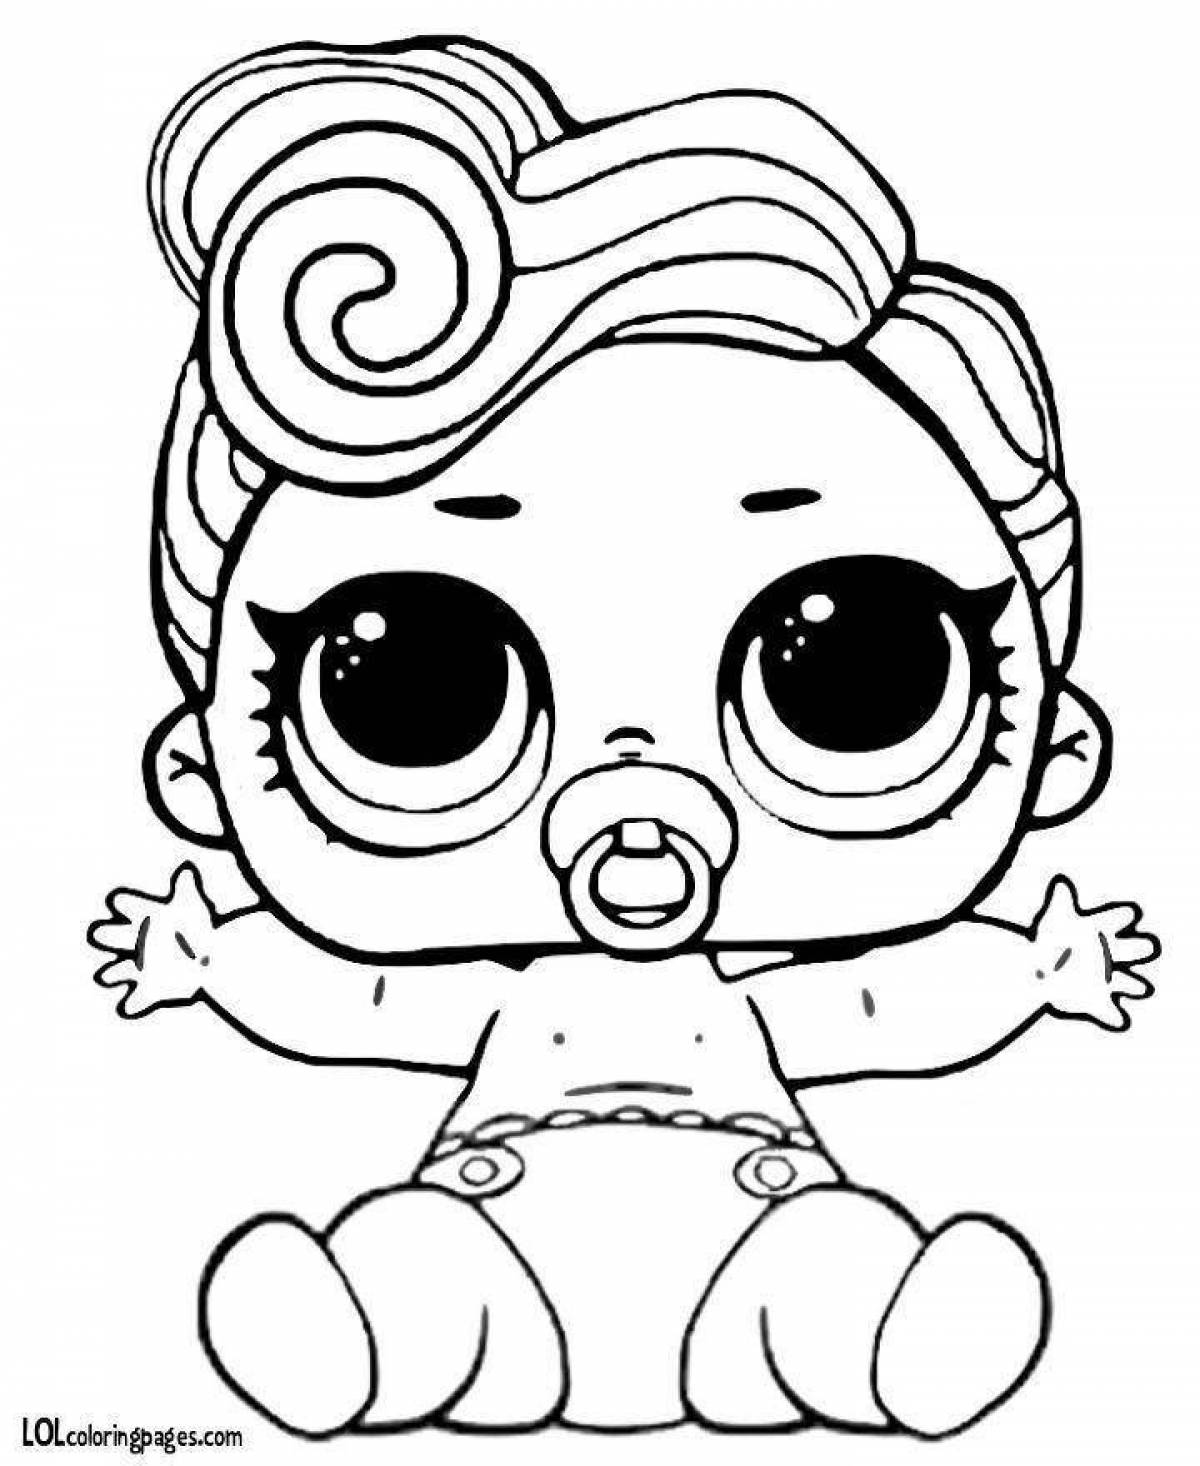 Colorful lol dolls coloring page for 5-6 year olds